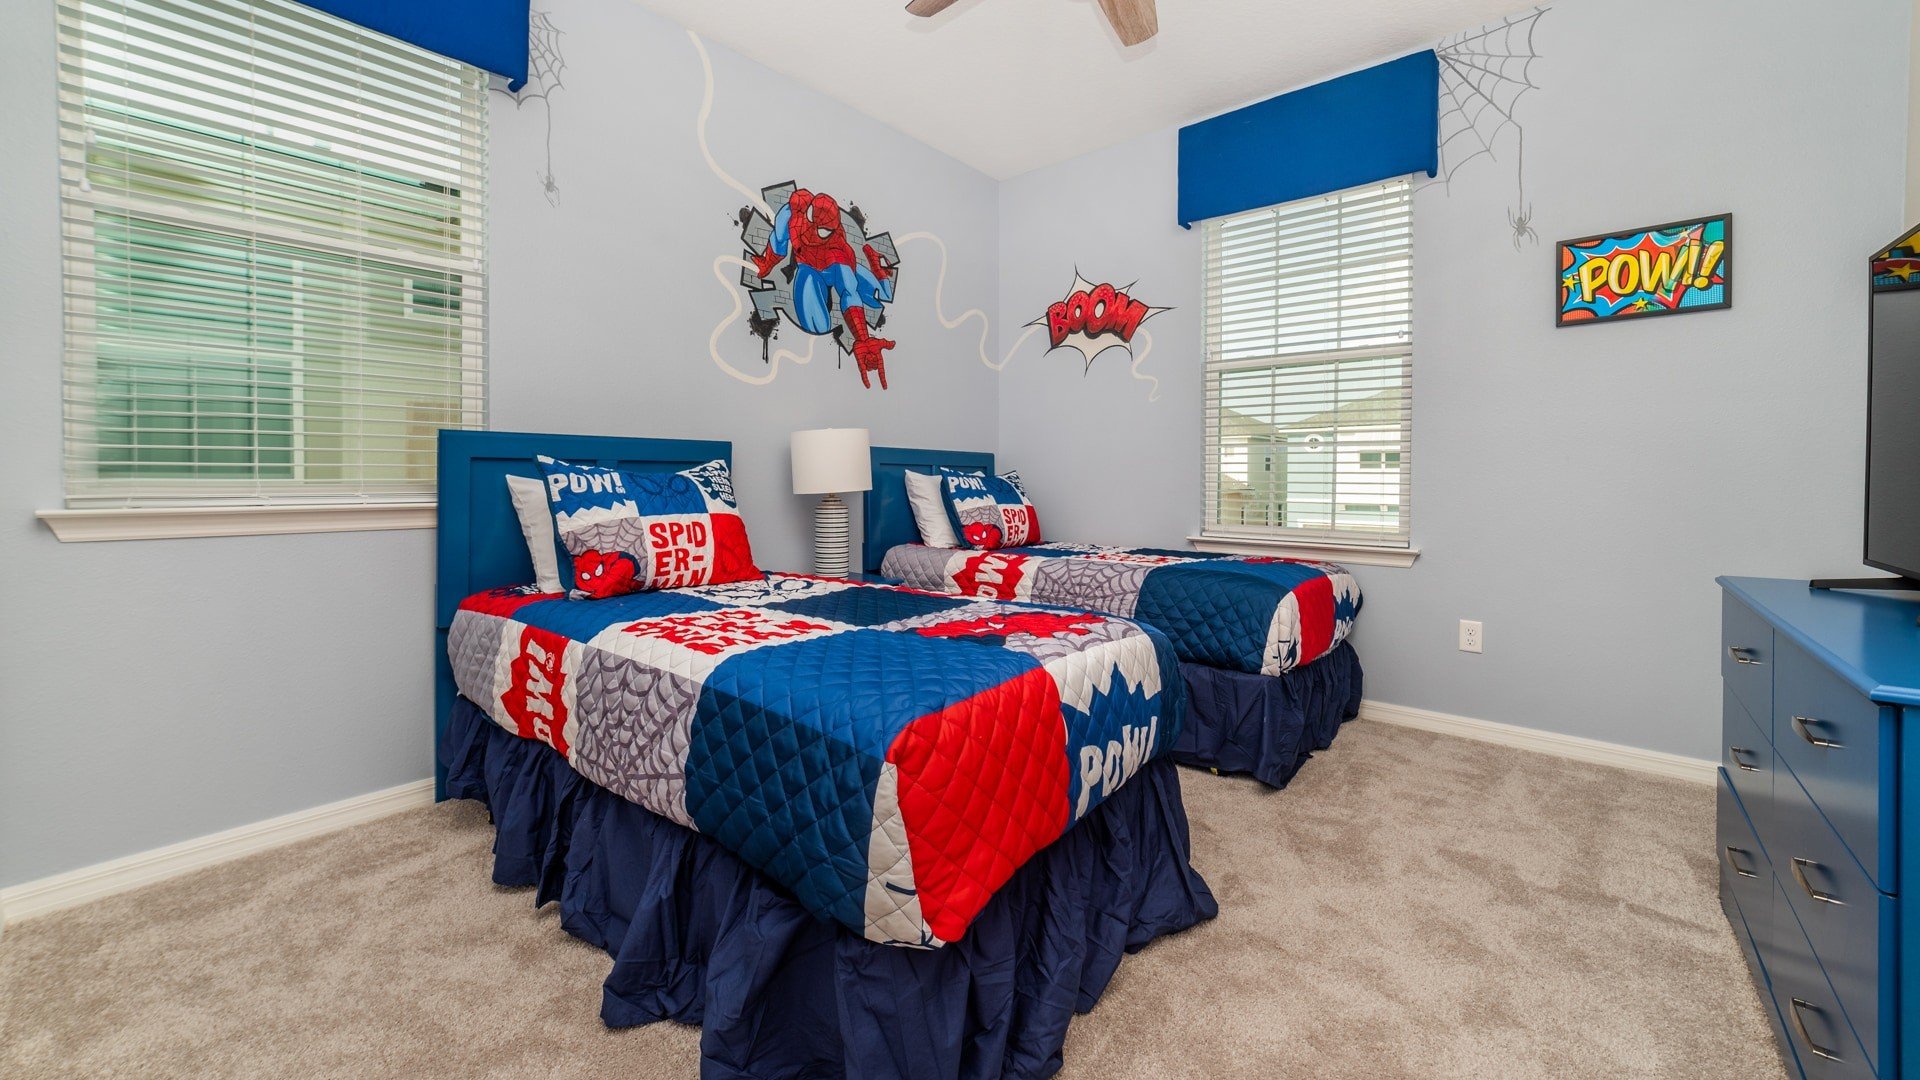 Two Twins Suite Bedroom 6 Upstairs
Attached Bathroom - Shower
Spider Man Theme